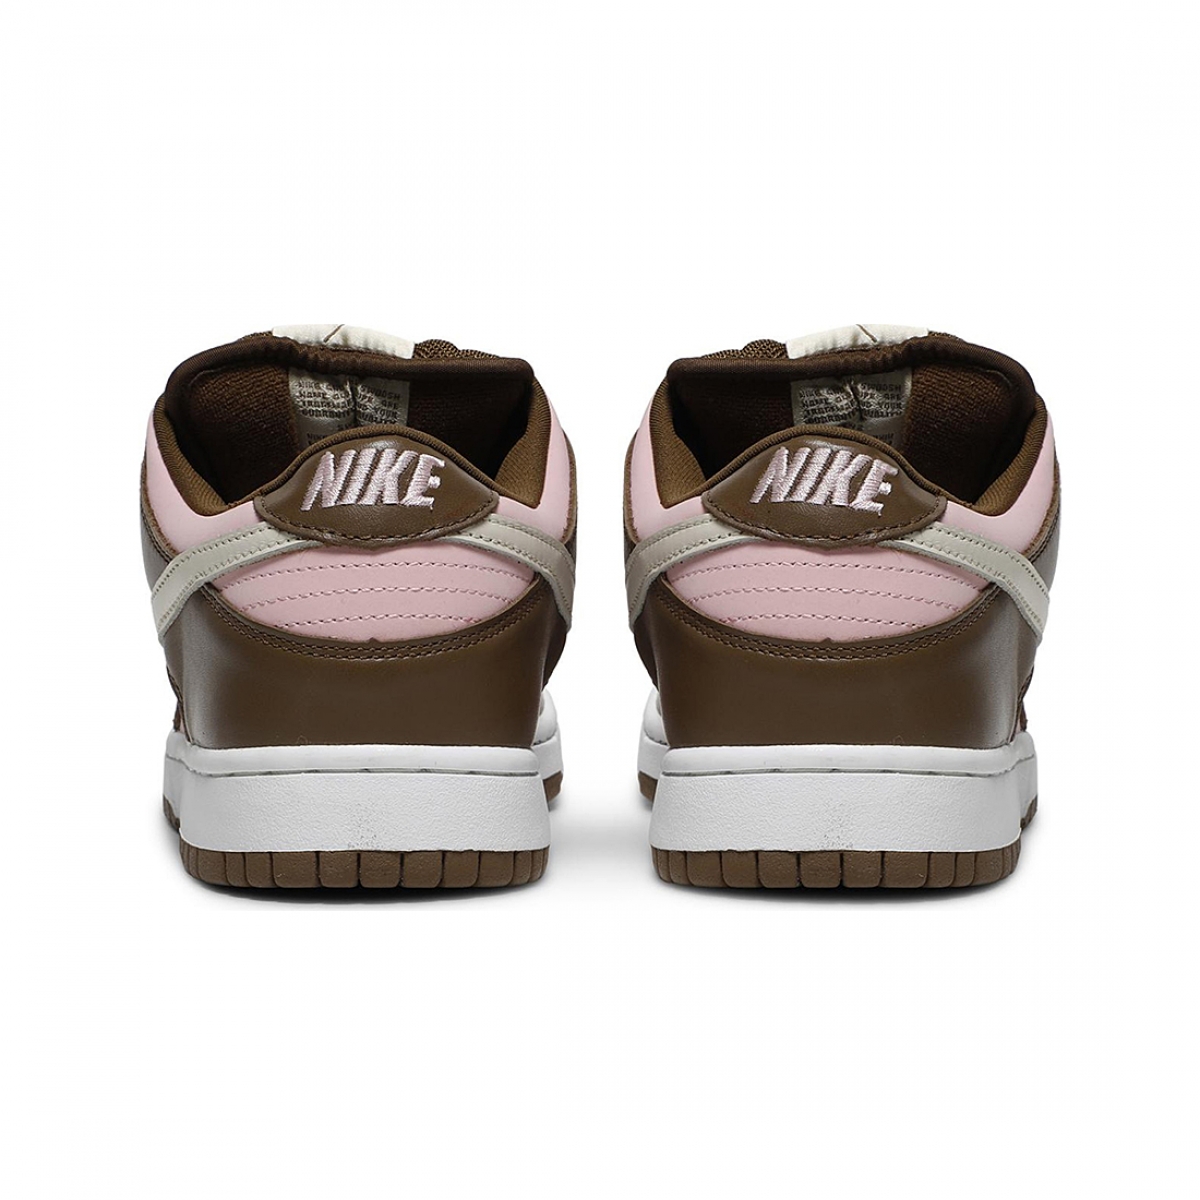 Nike Dunk SB Inspired by Stussy Cherry reconstructed with